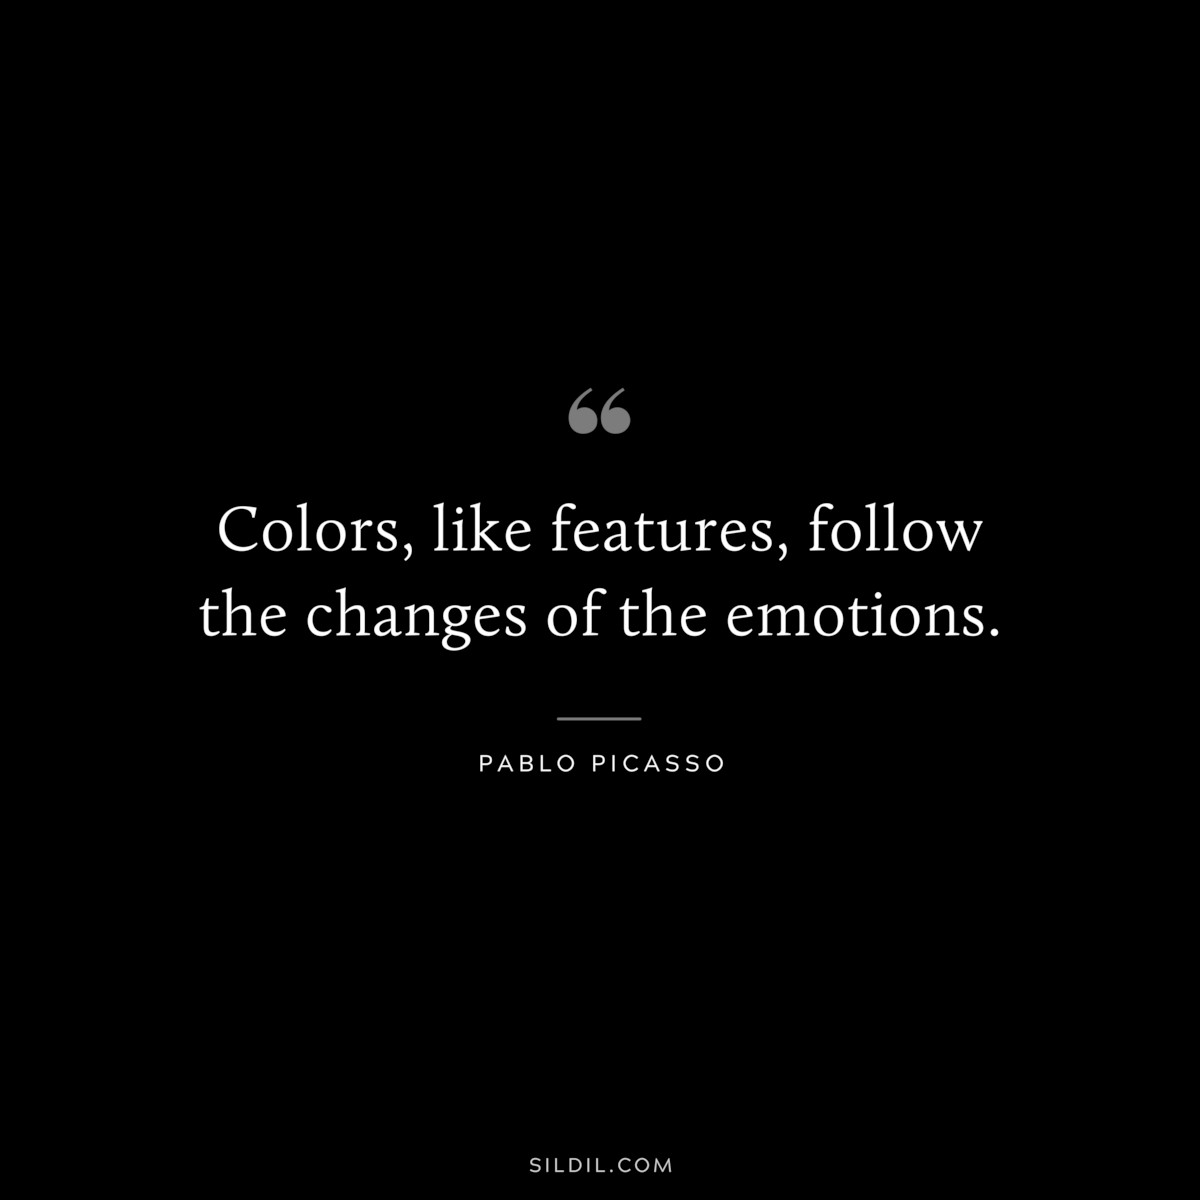 Colors, like features, follow the changes of the emotions. ― Pablo Picasso